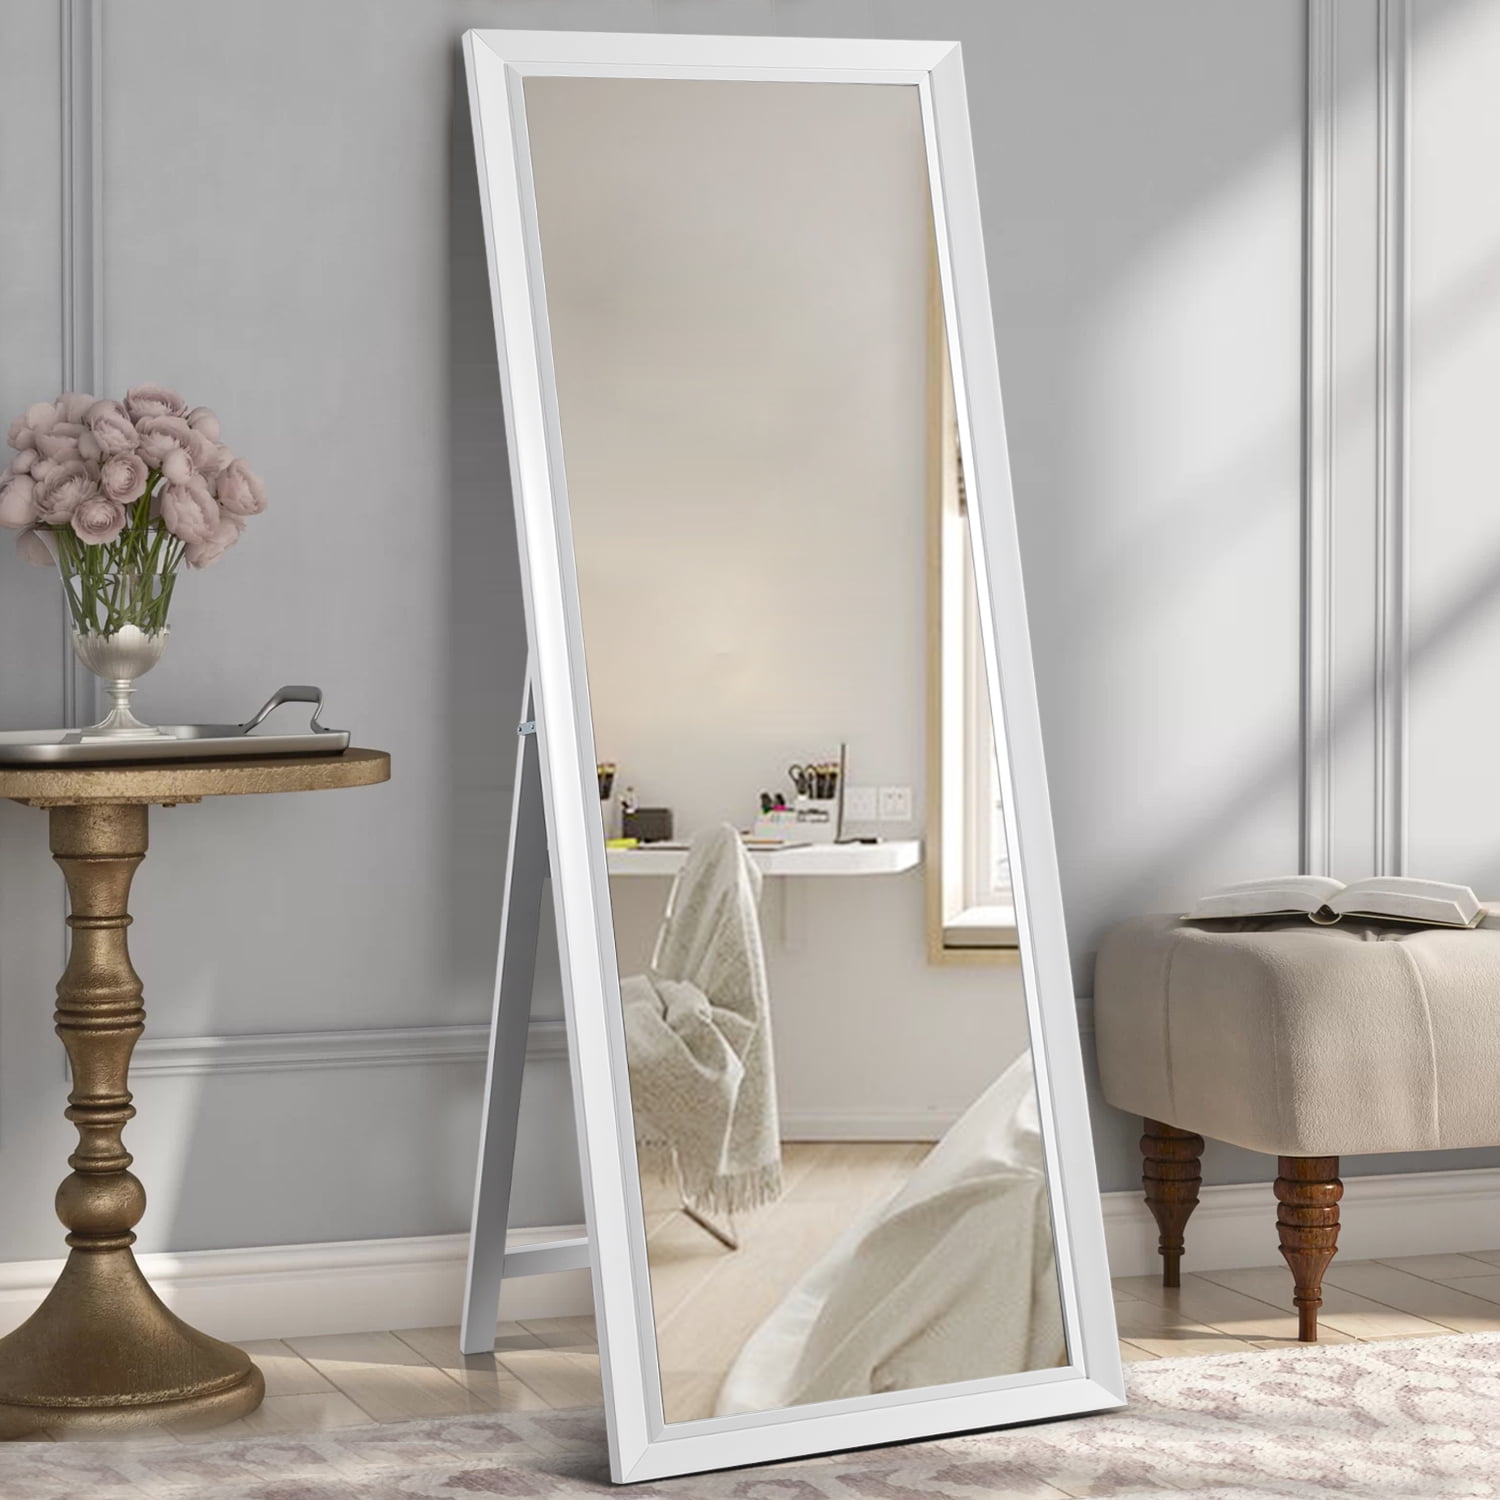 Full Length Mirror Floor Mirror with Standing Holder Wall Mounted Mirror Hanging Horizontally